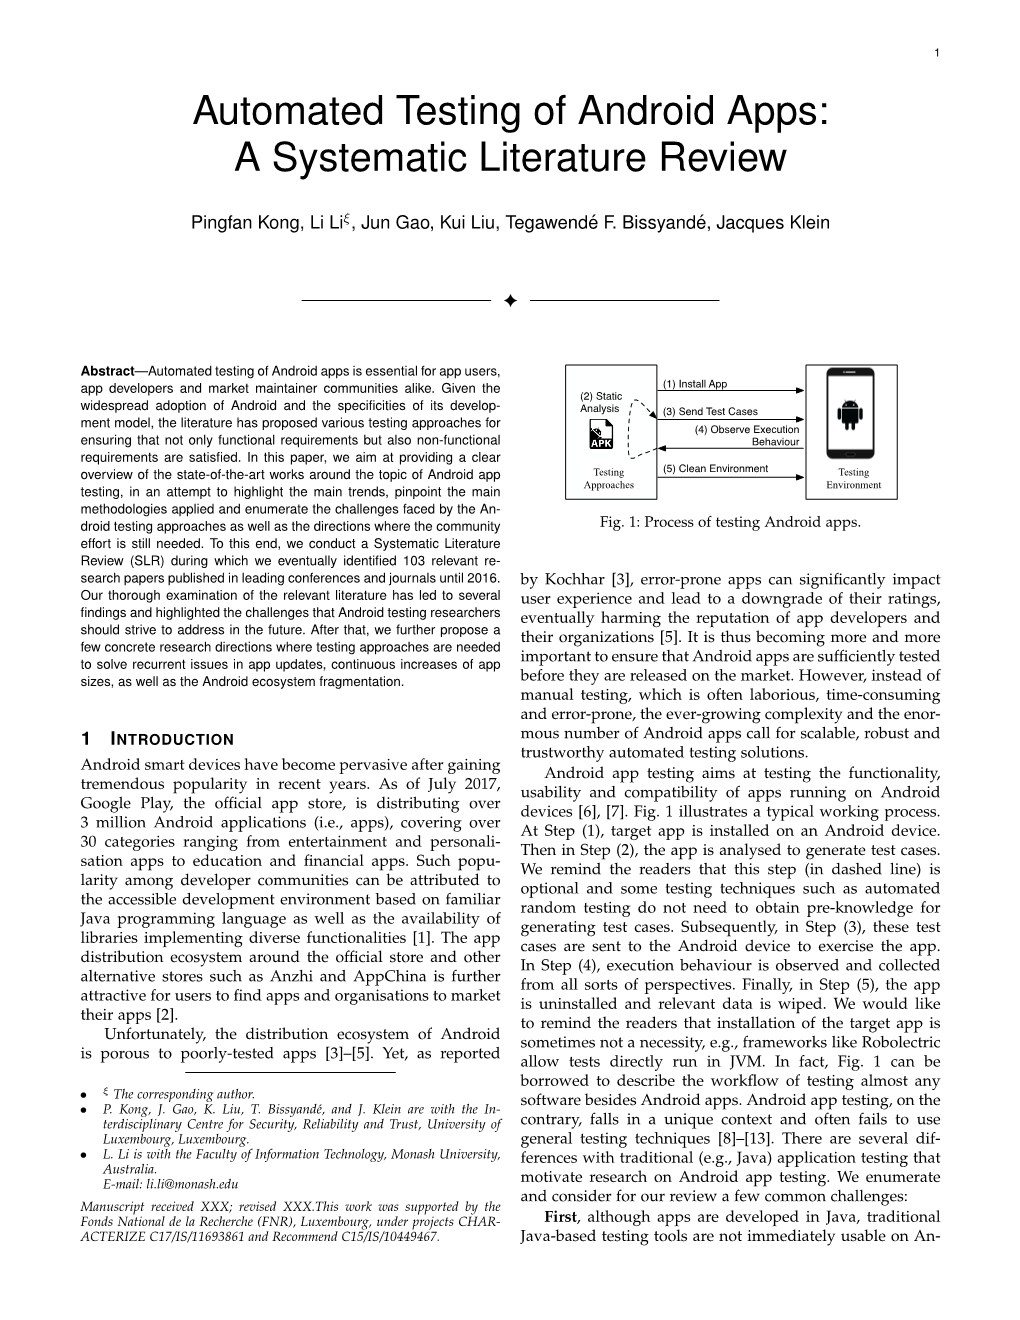 Automated Testing of Android Apps: a Systematic Literature Review